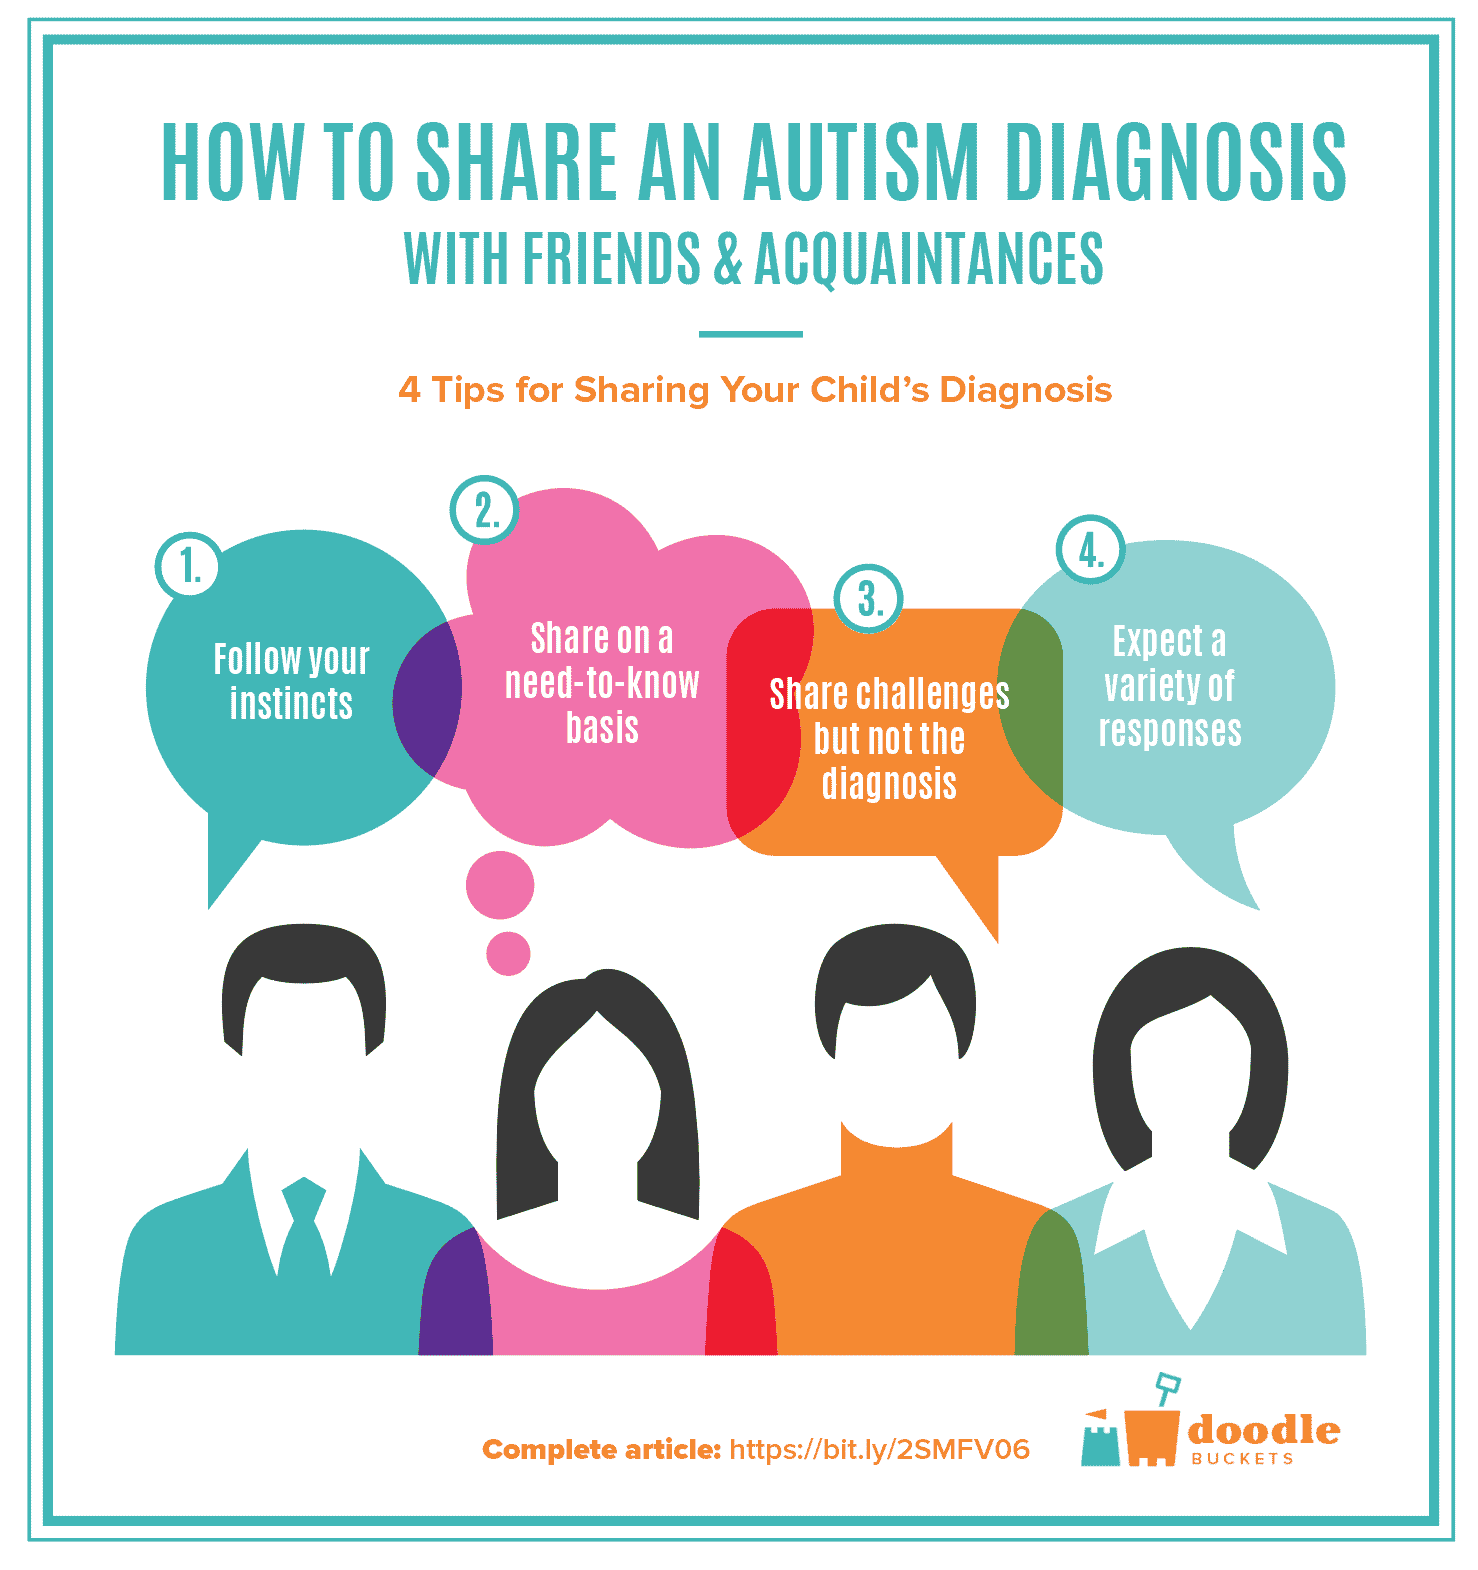 Tips for Sharing an Autism Diagnosis with Friends